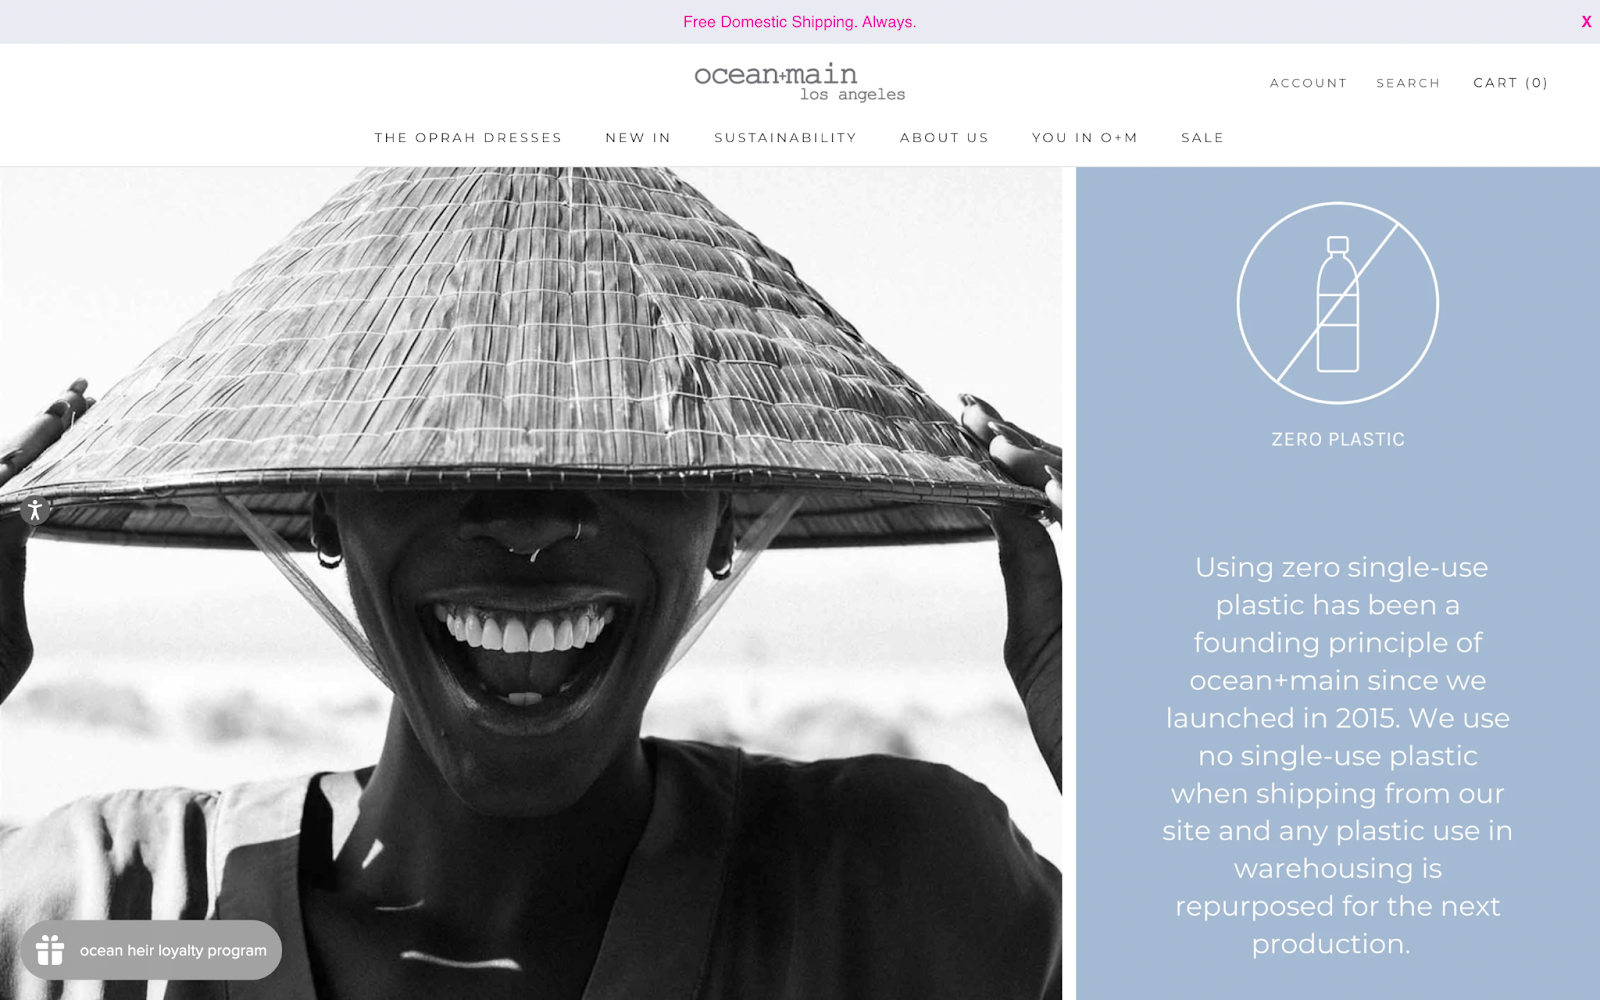 Sustainable brands–A screenshot of ocean+main’s sustainability page with an image of a person wearing a traditional Asian hat and text beside it explaining their Zero Plastic policy.